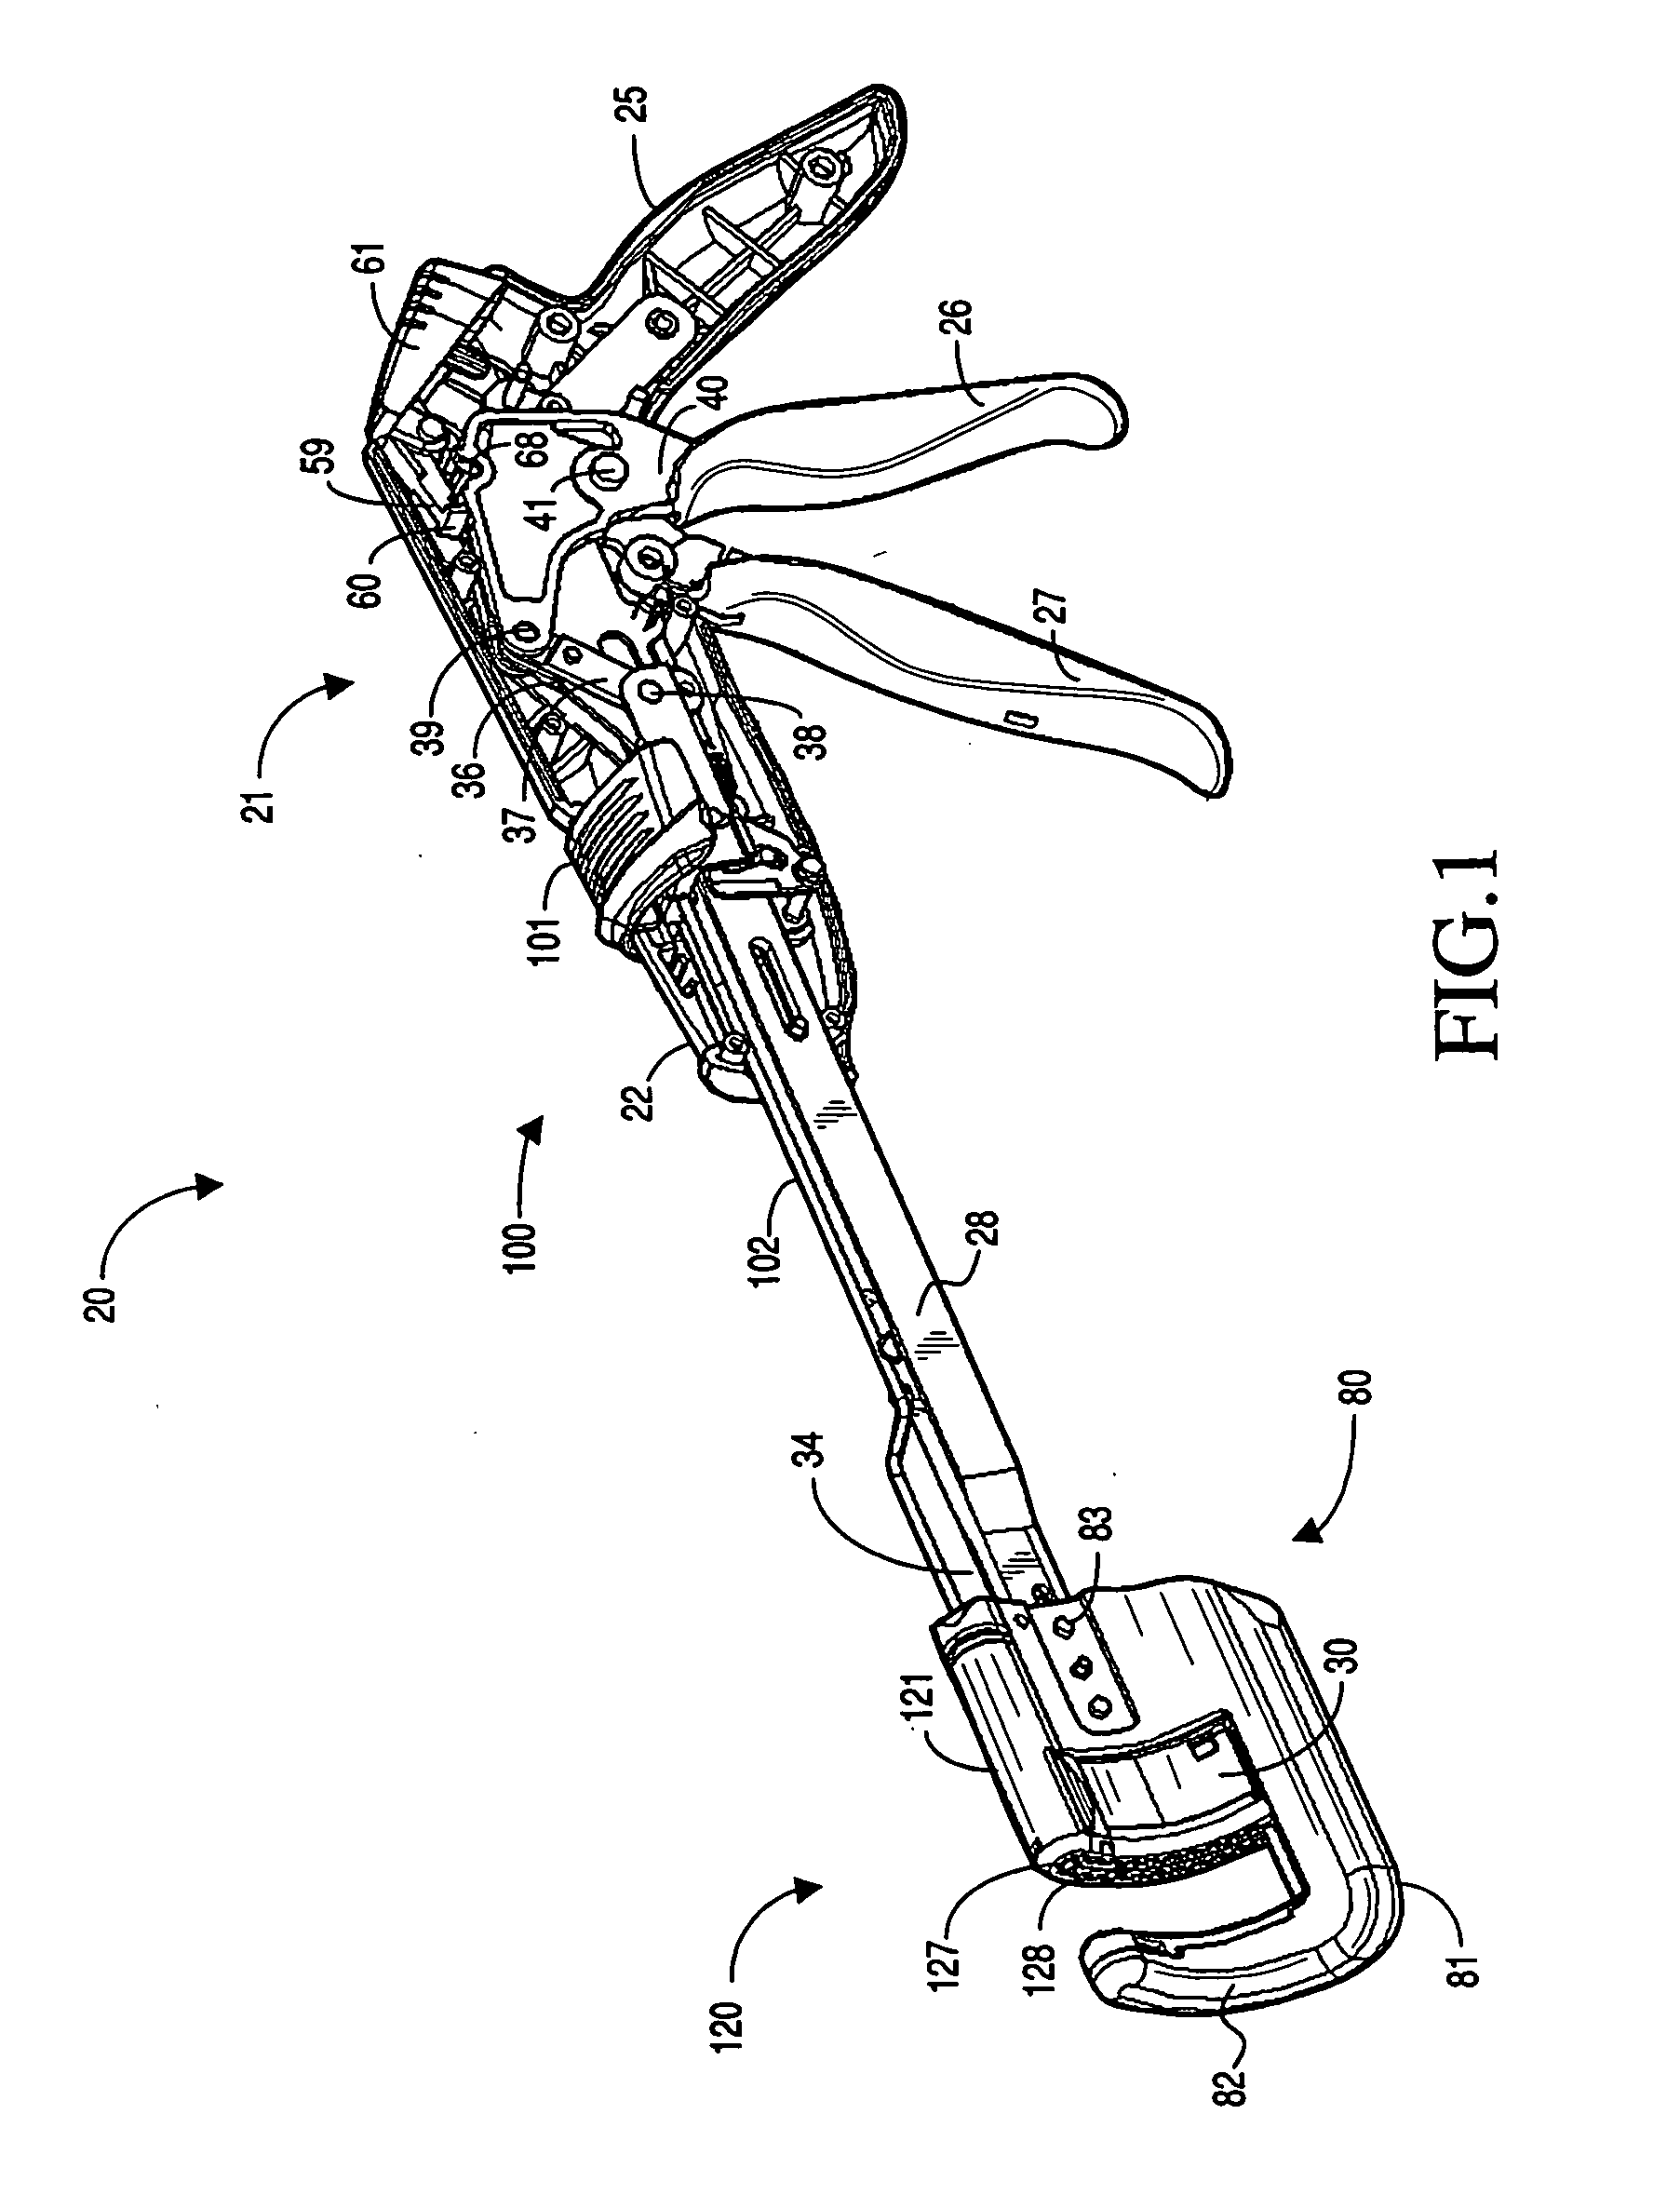 Replaceable cartridge module for a surgical stapling and cutting instrument